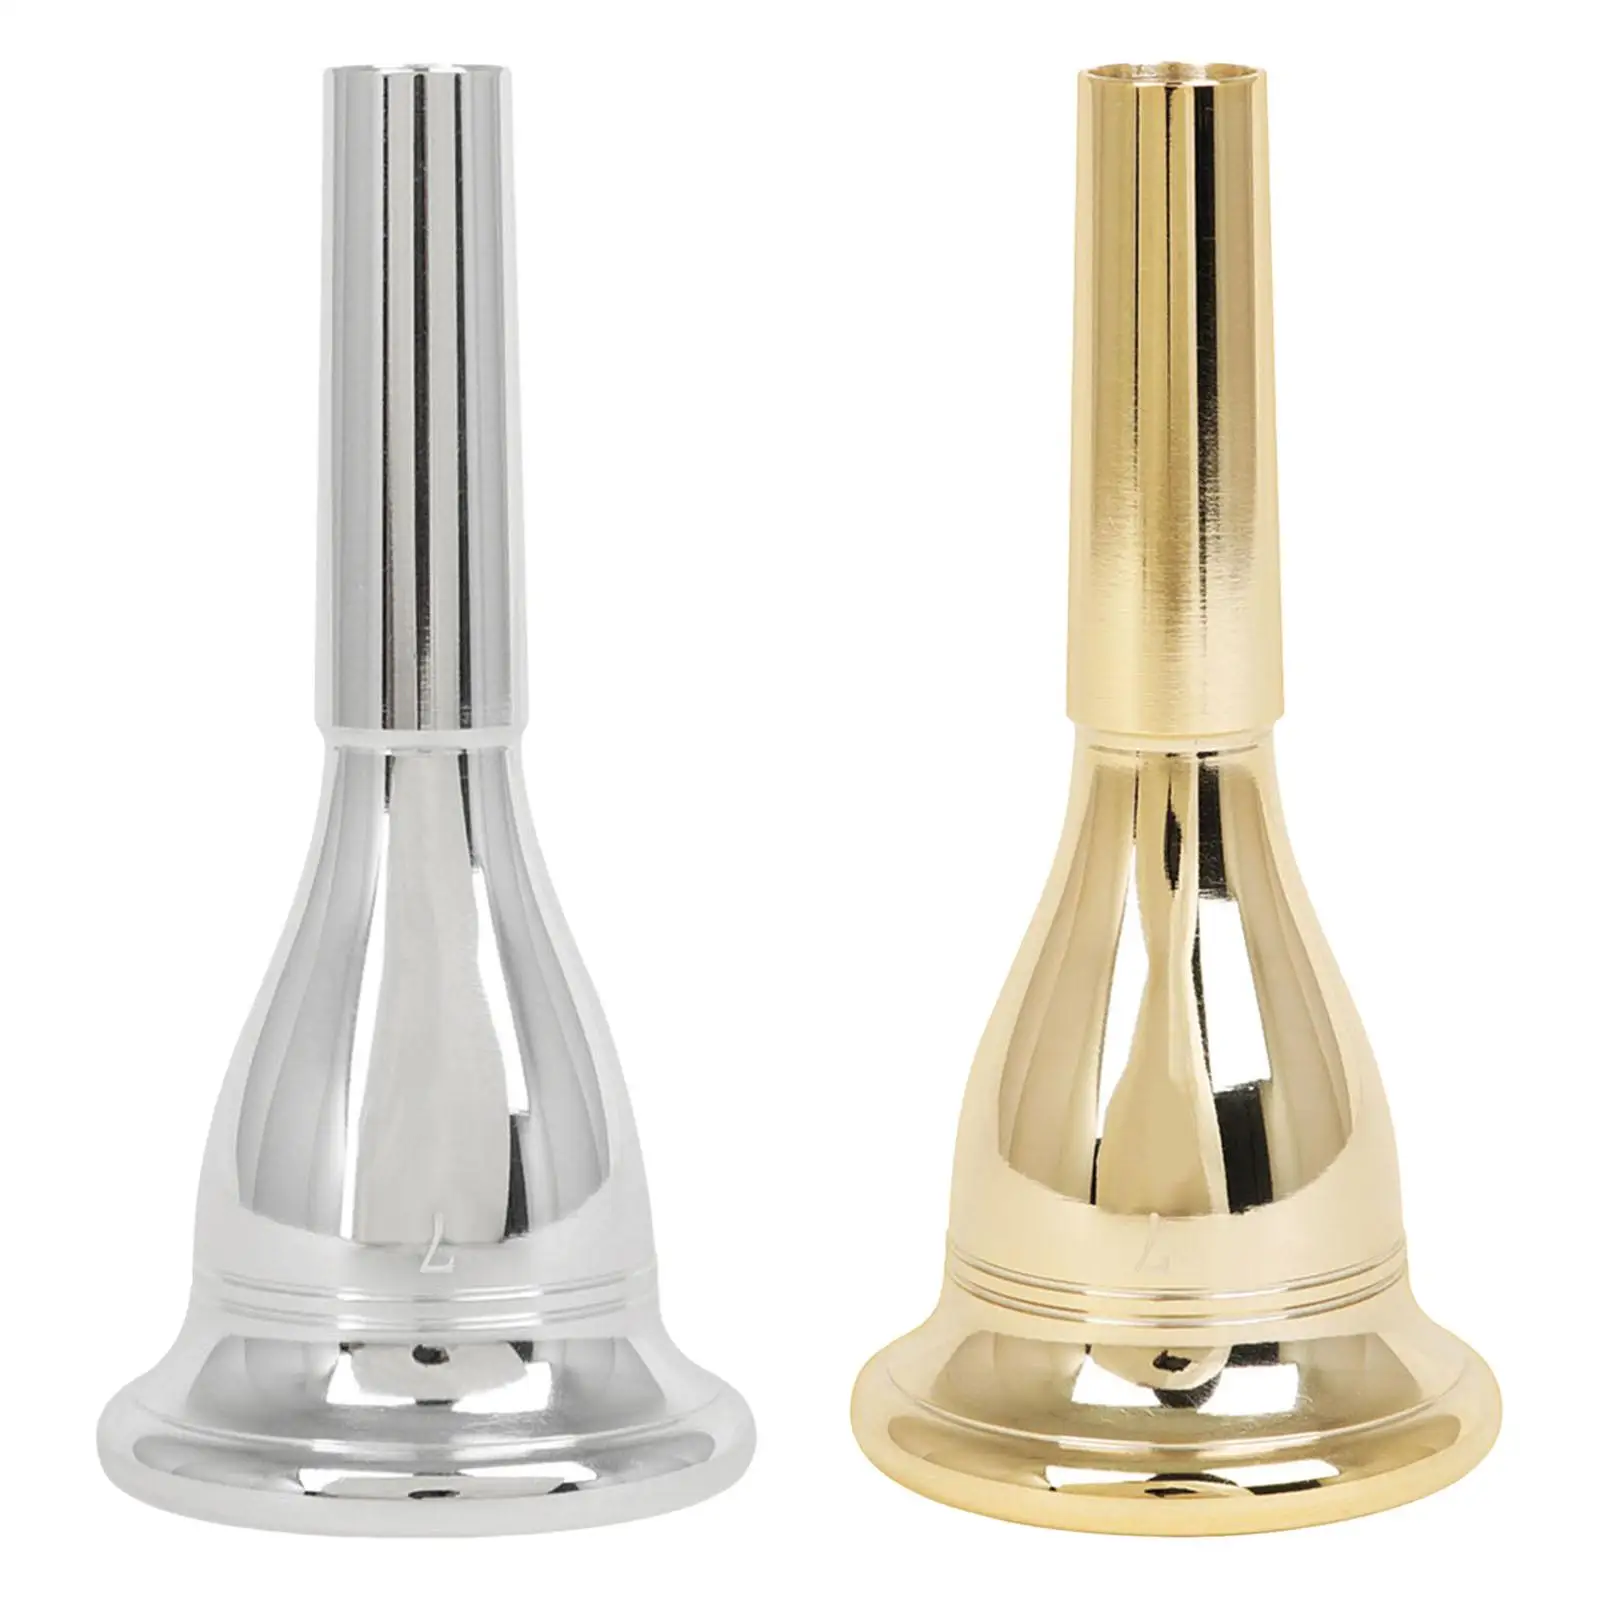 Number 7 Tuba Mouthpiece Instrument Accessories Precise Musical Good Air Tightness Music Parts Brass for Professional